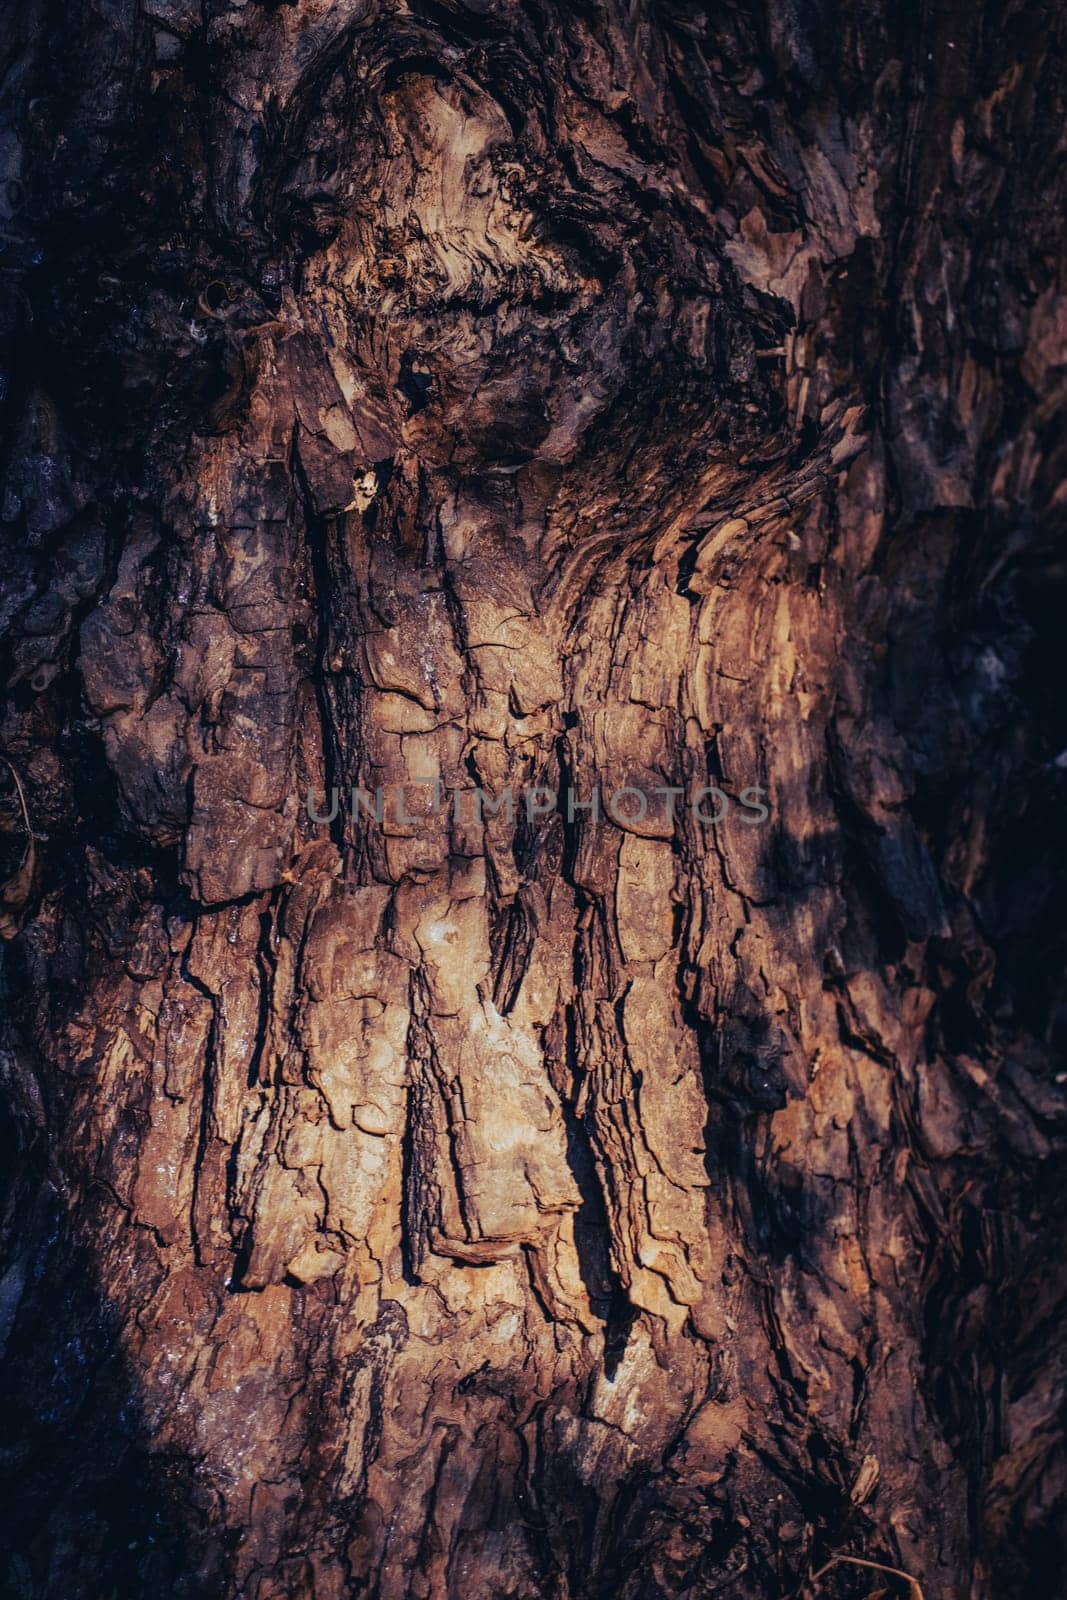 Close up relief texture of tree bark concept photo. Autumn atmosphere image by _Nataly_Nati_